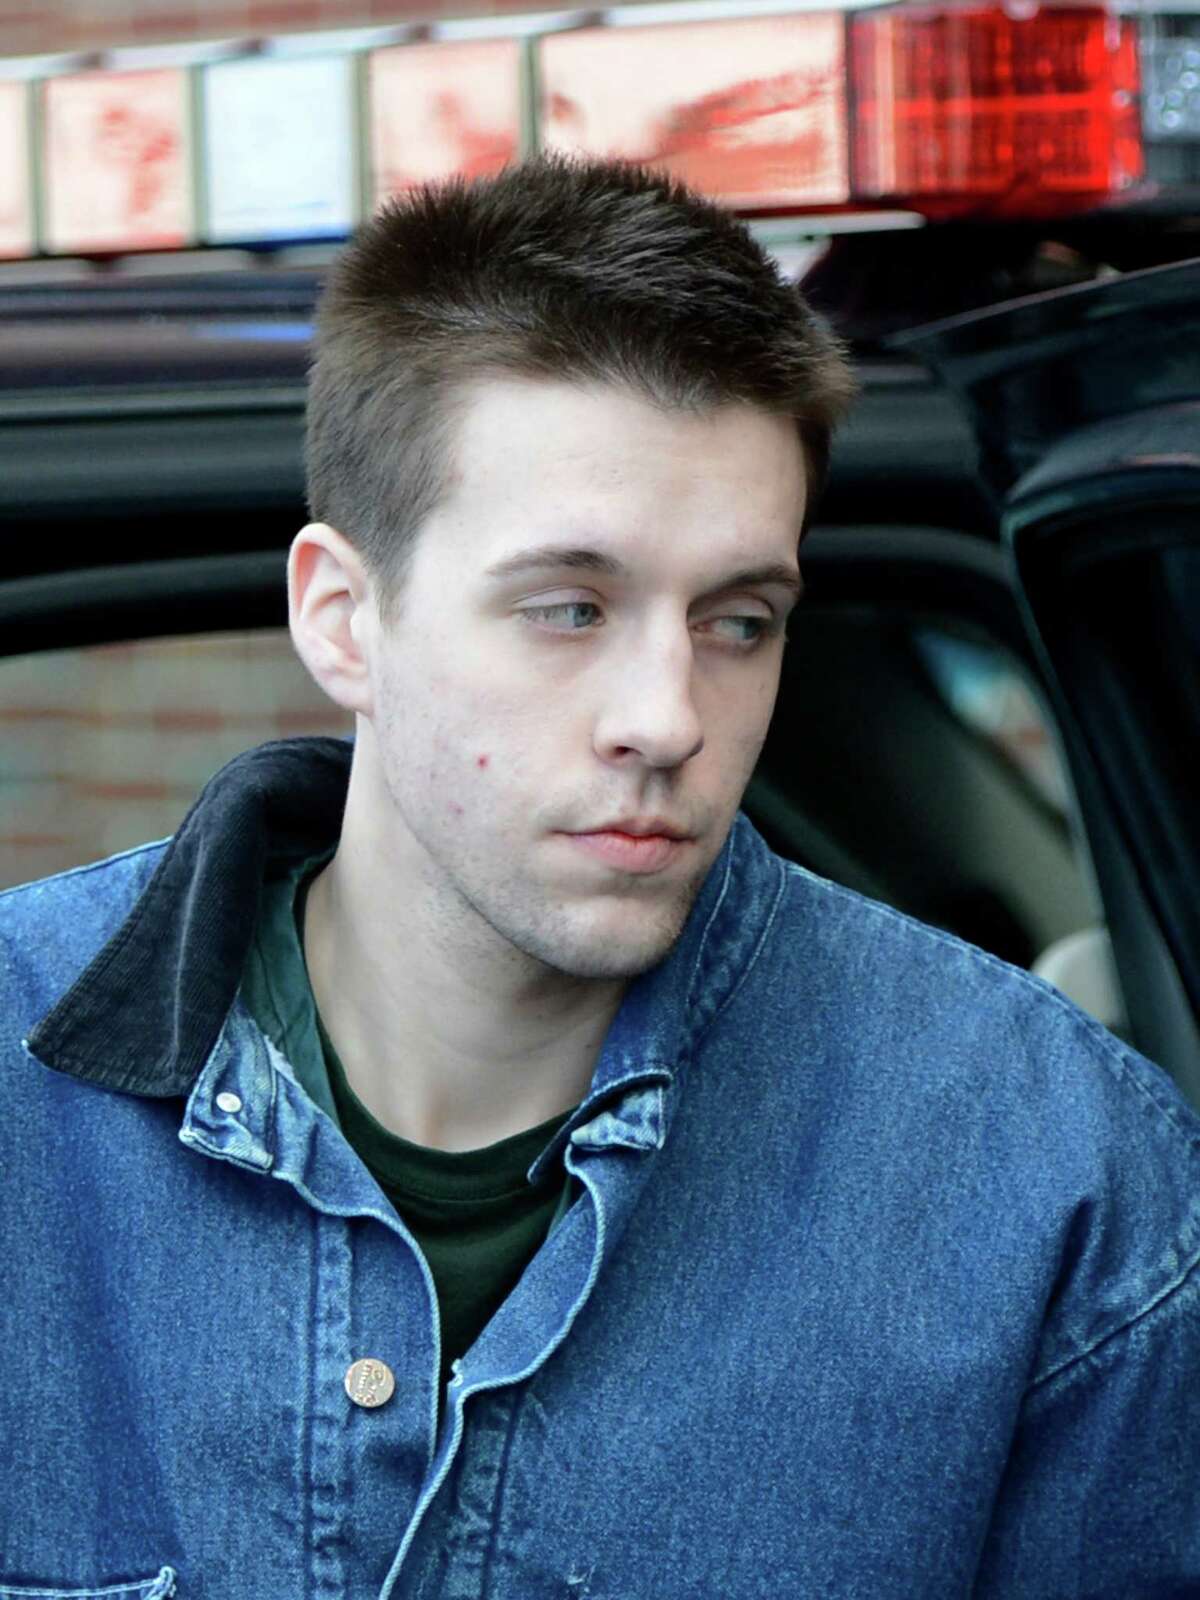 Dennis Drue, age 22, is led from a State Police car Monday, Jan. 7, 2013, to the Saratoga County Courthouse in Ballston Spa, N.Y. Drue allegedly drove the car which rear-ended an SUV killing two popular Shenendehowa High School students on the Northway last Dec. (Skip Dickstein/Times Union)